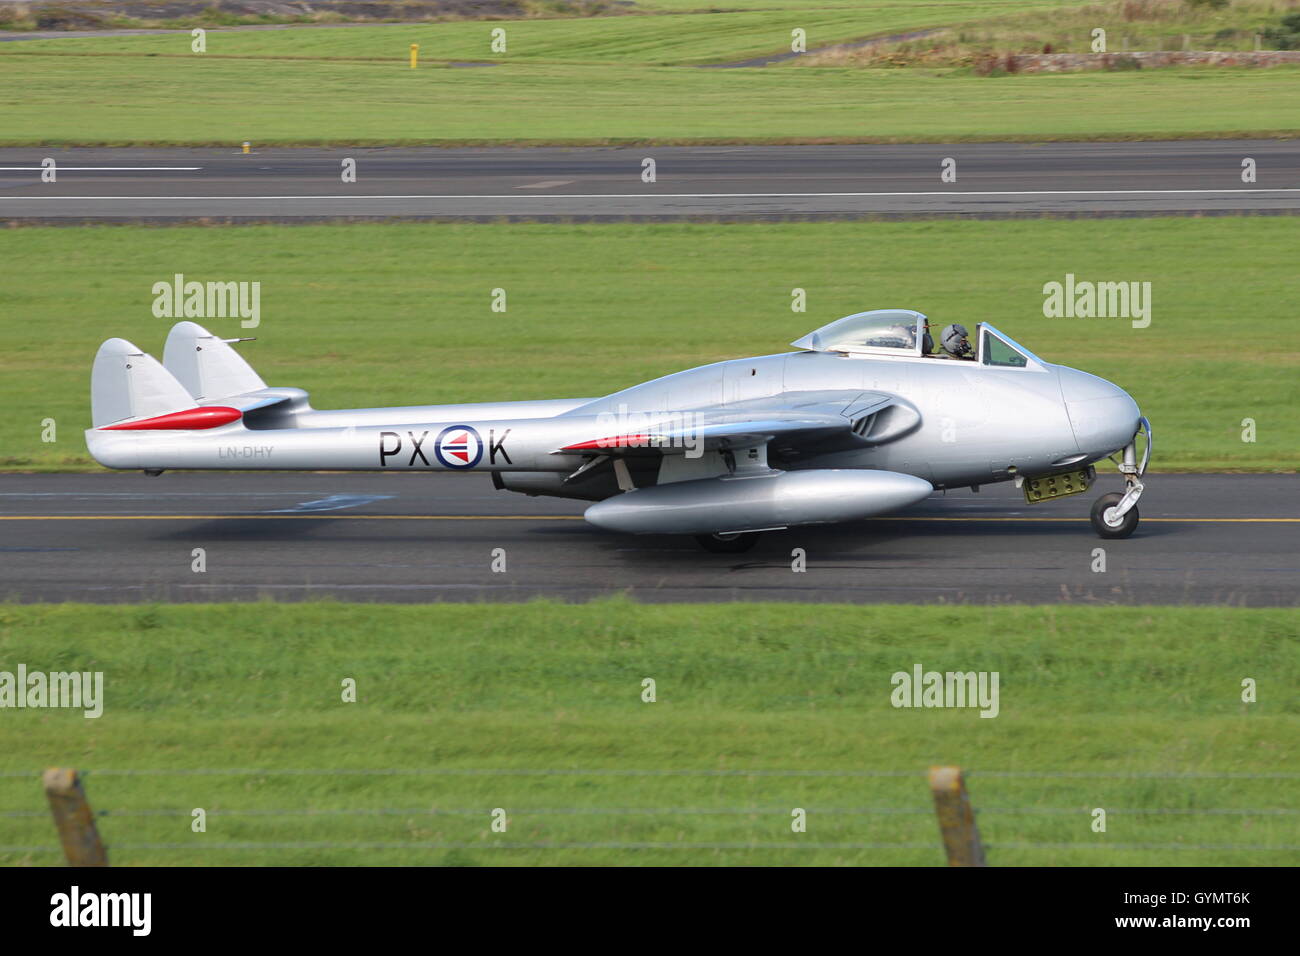 LN-DHY, a de Havilland Vampire FB52 from the Royal Norwegian Air Force Historical Squadron, taxis for departure at Prestwick. Stock Photo